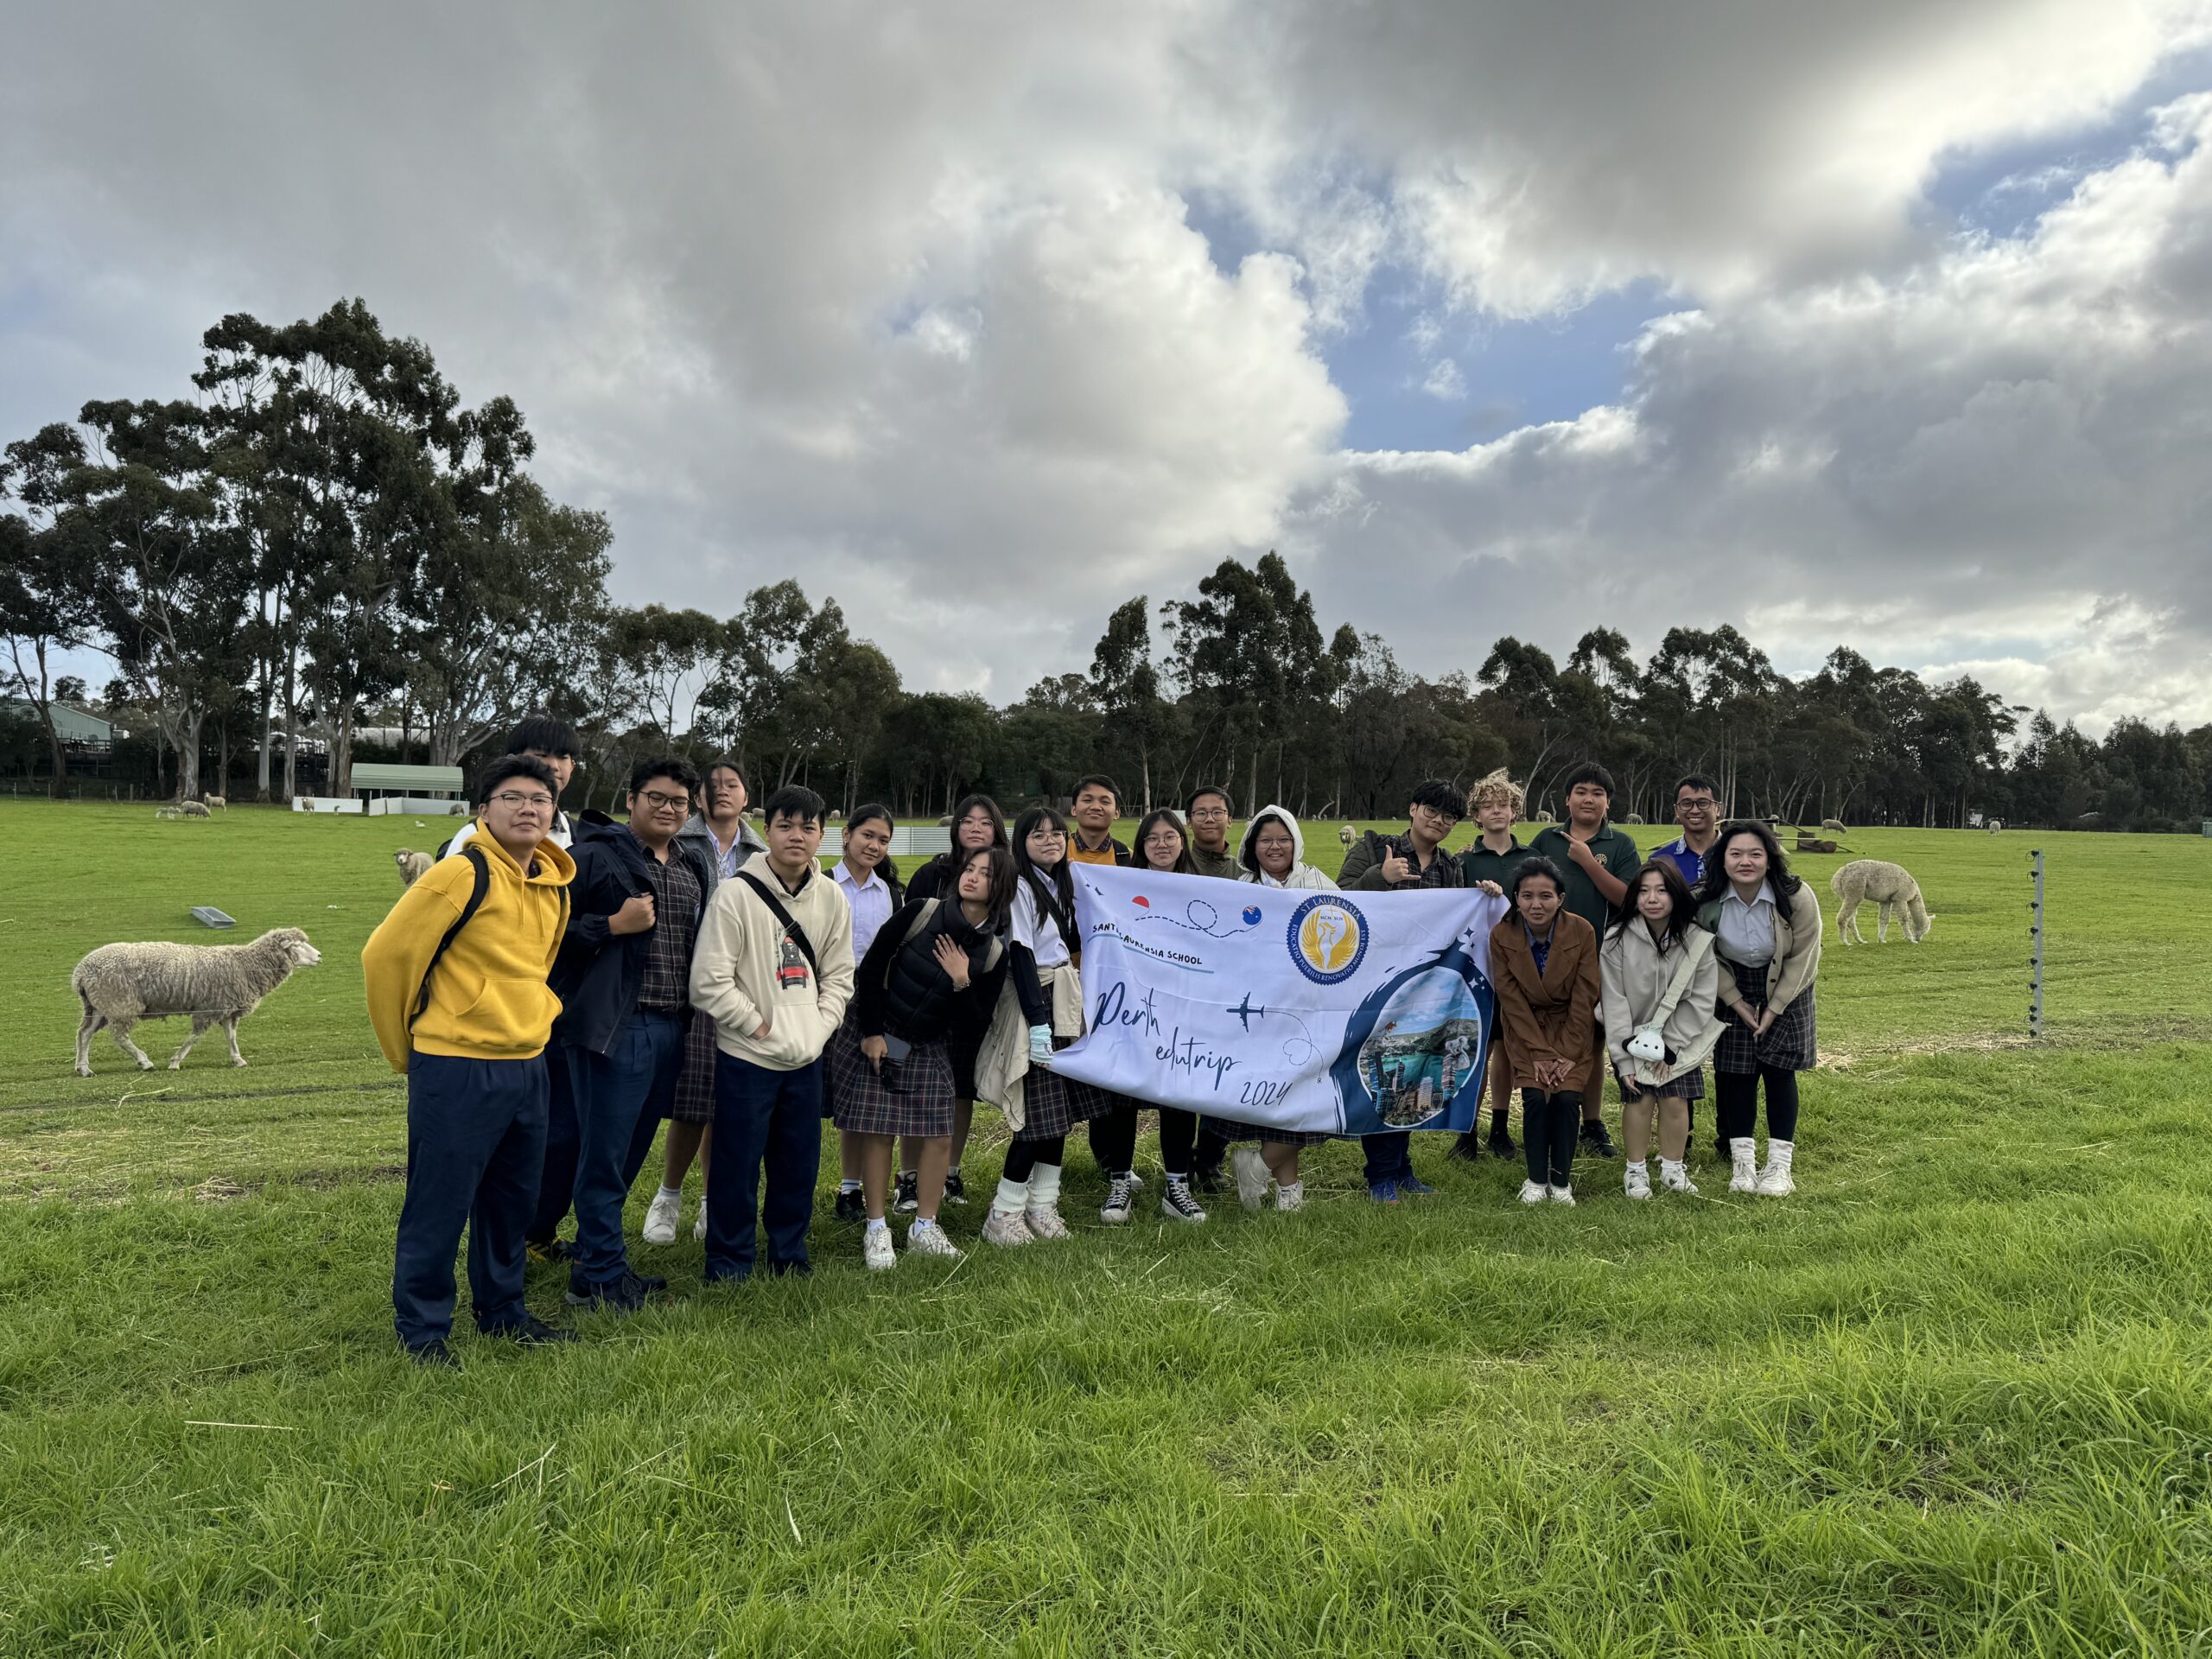 Students at the school farm holding a banner as part of teh Santa Laurensia Sister School International Cultural Exchange